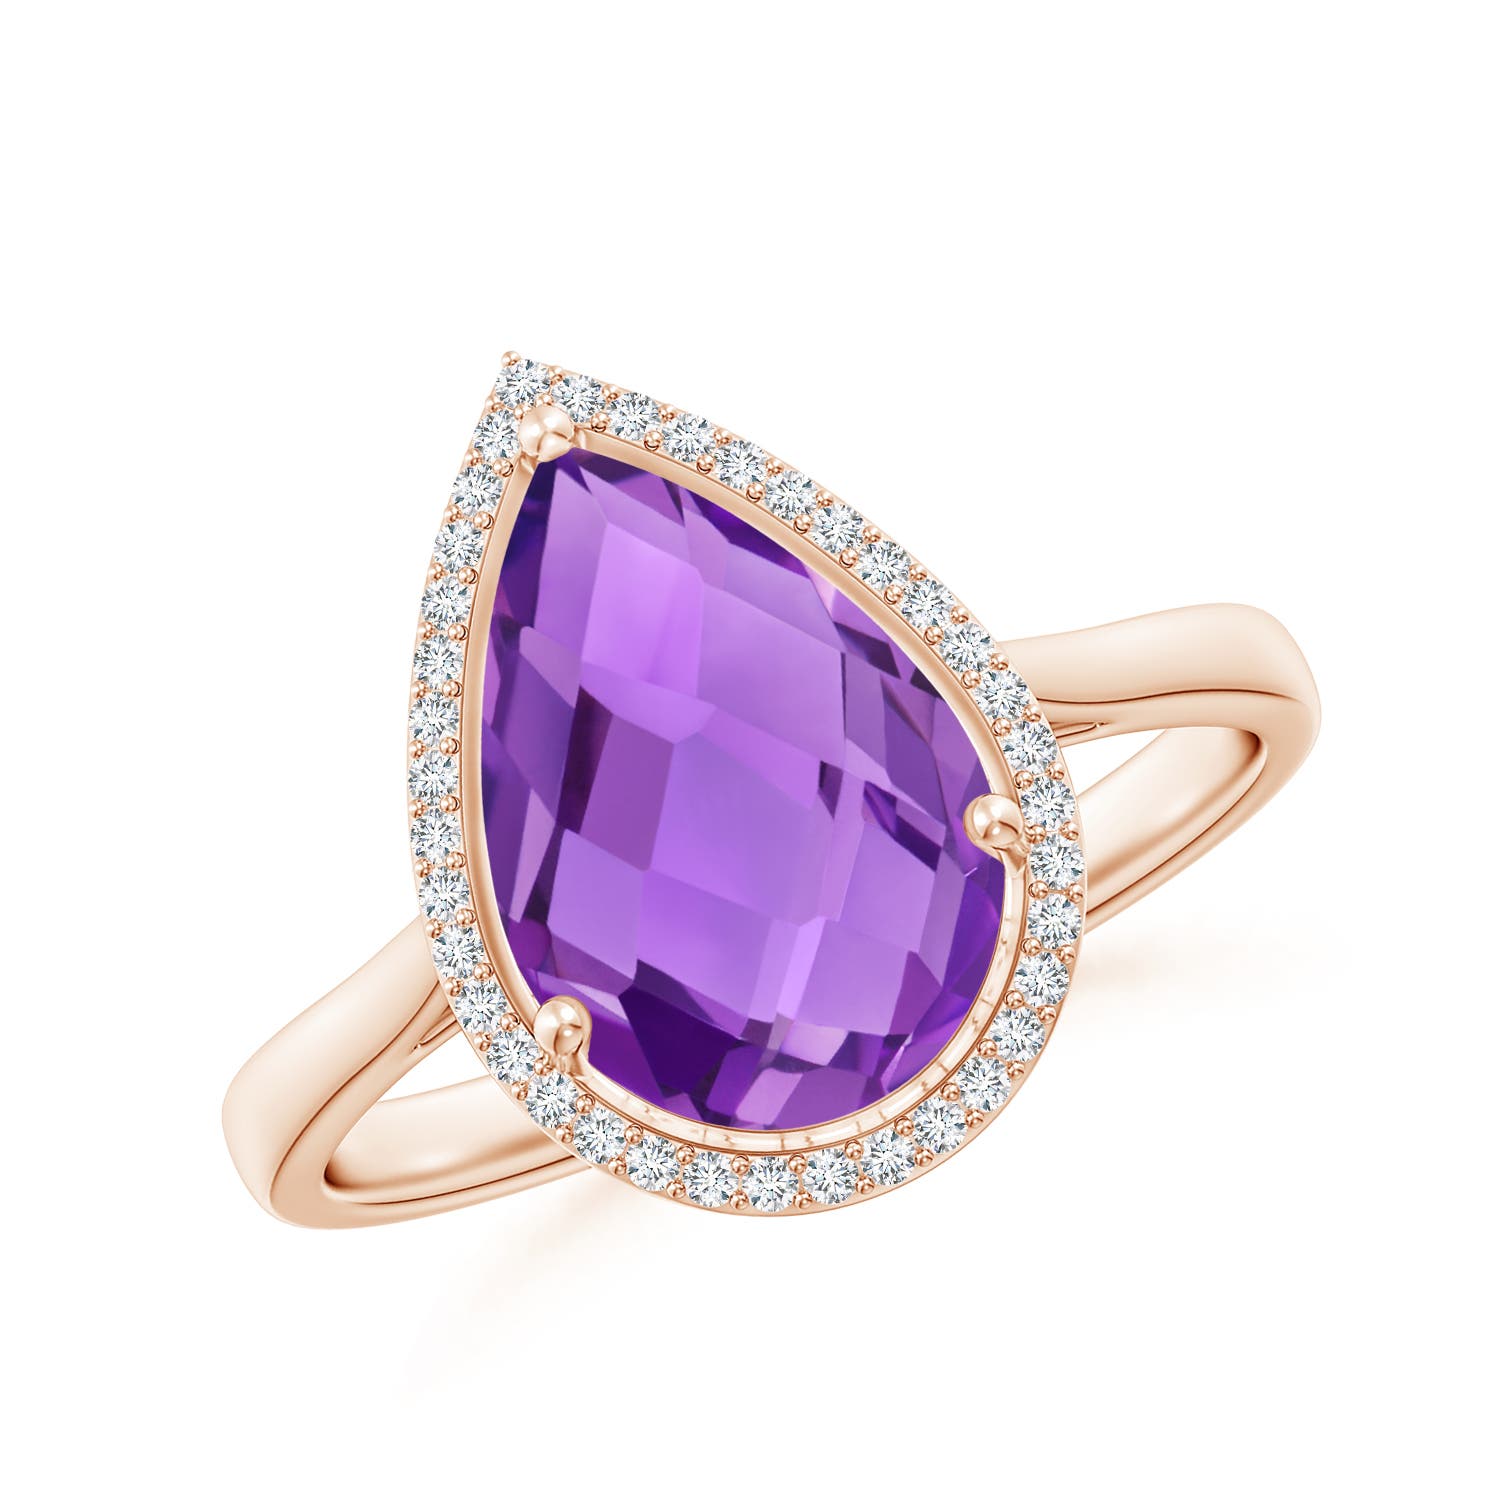 AAA - Amethyst / 2.79 CT / 14 KT Rose Gold